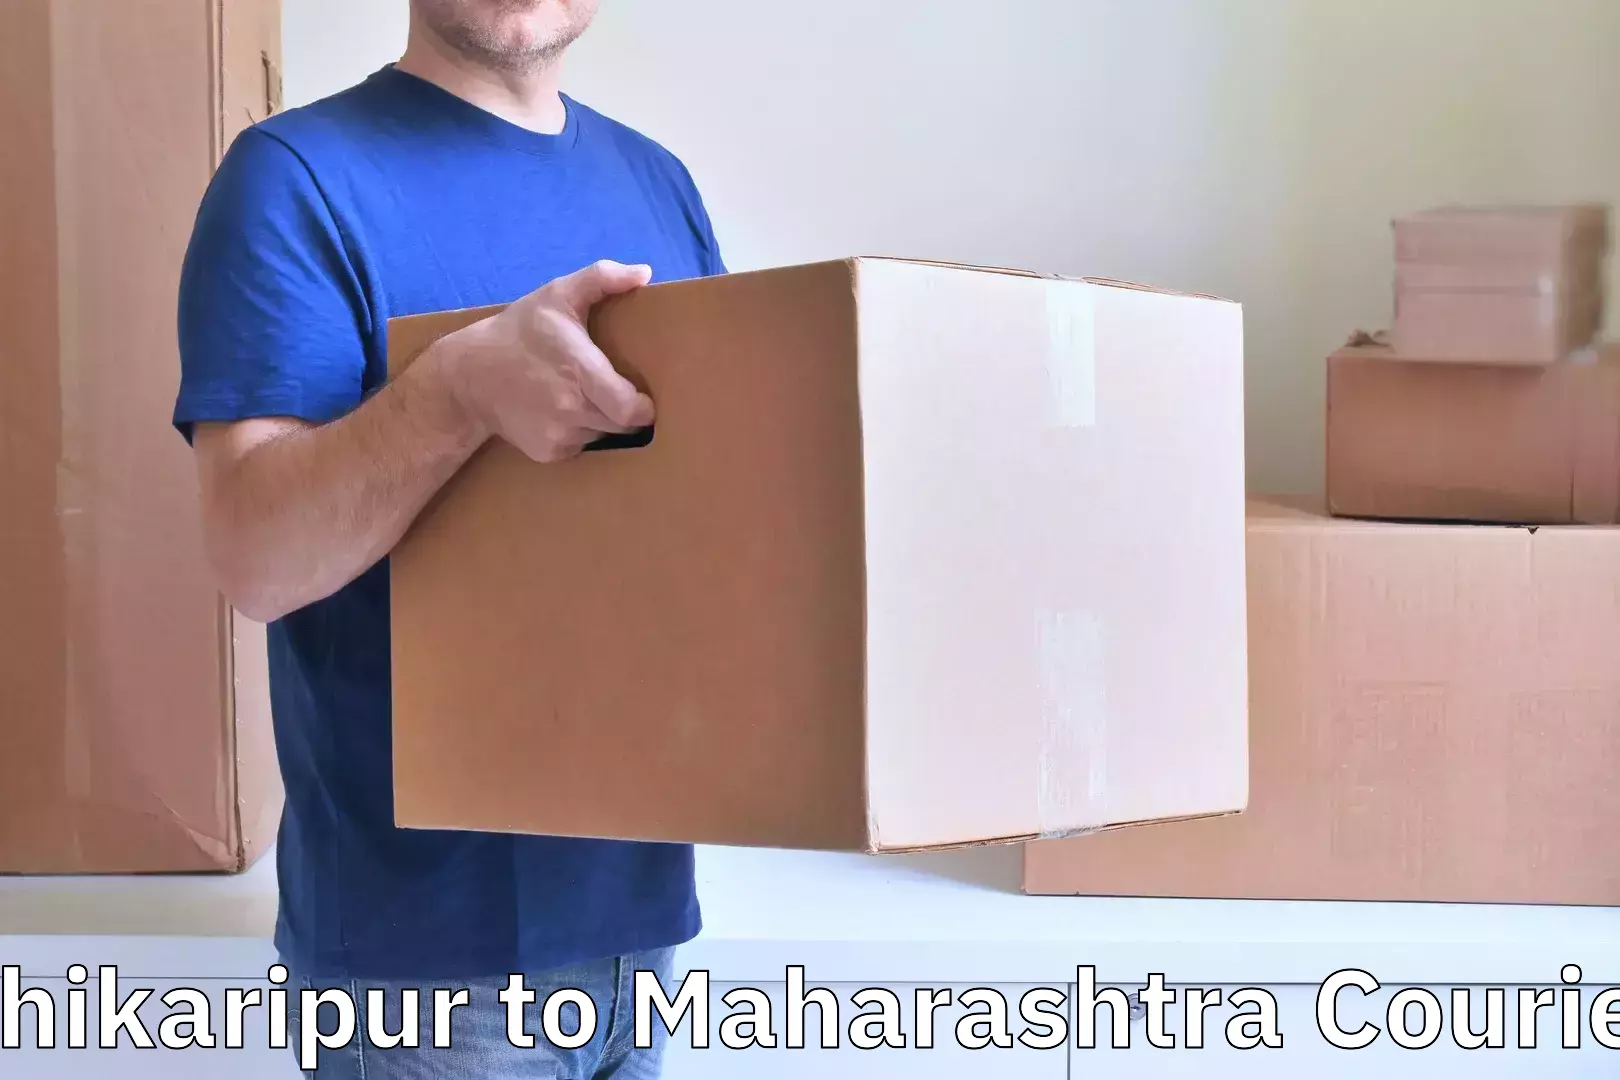 Luggage delivery app Shikaripur to DY Patil Vidyapeeth Pune